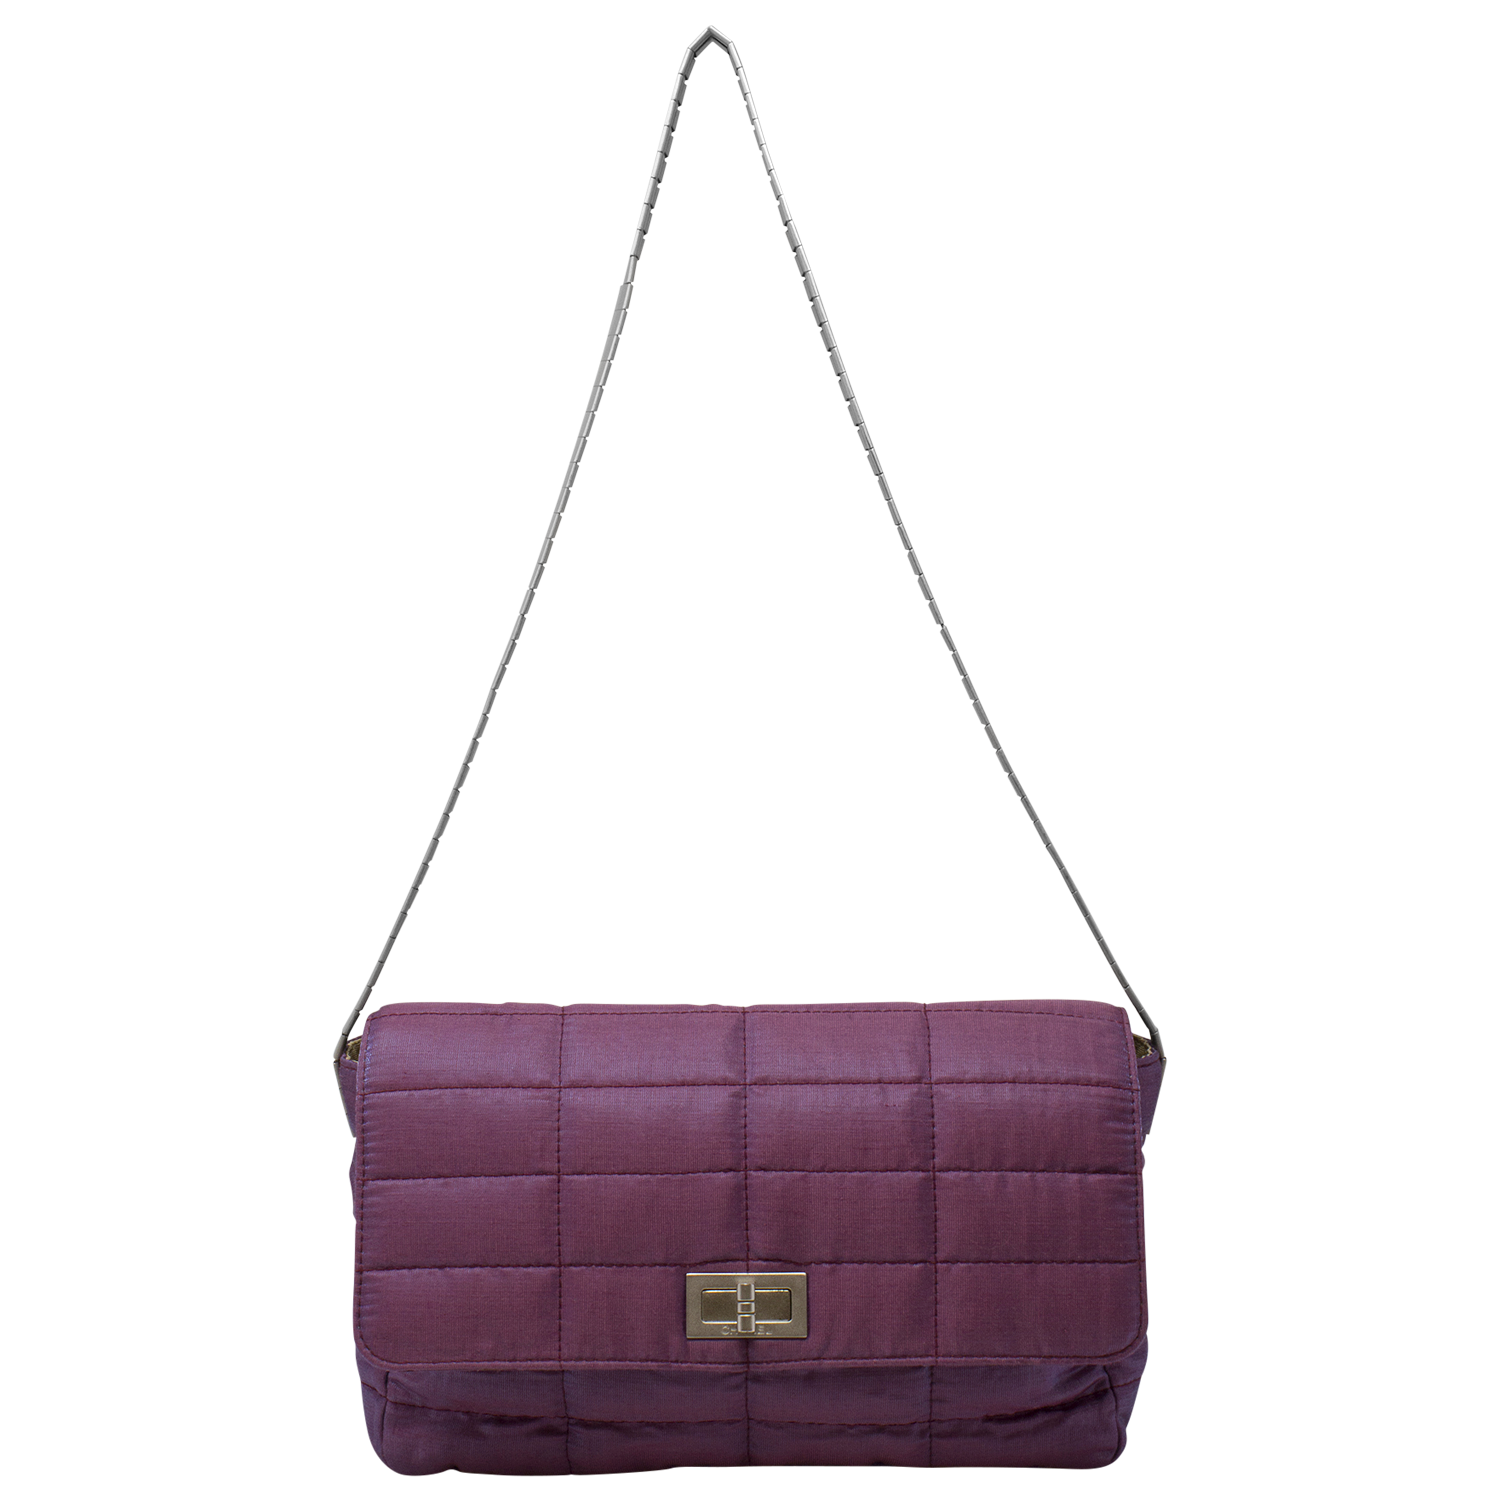 Chanel Purple Iridescent Quilted Mademoiselle Flap Bag